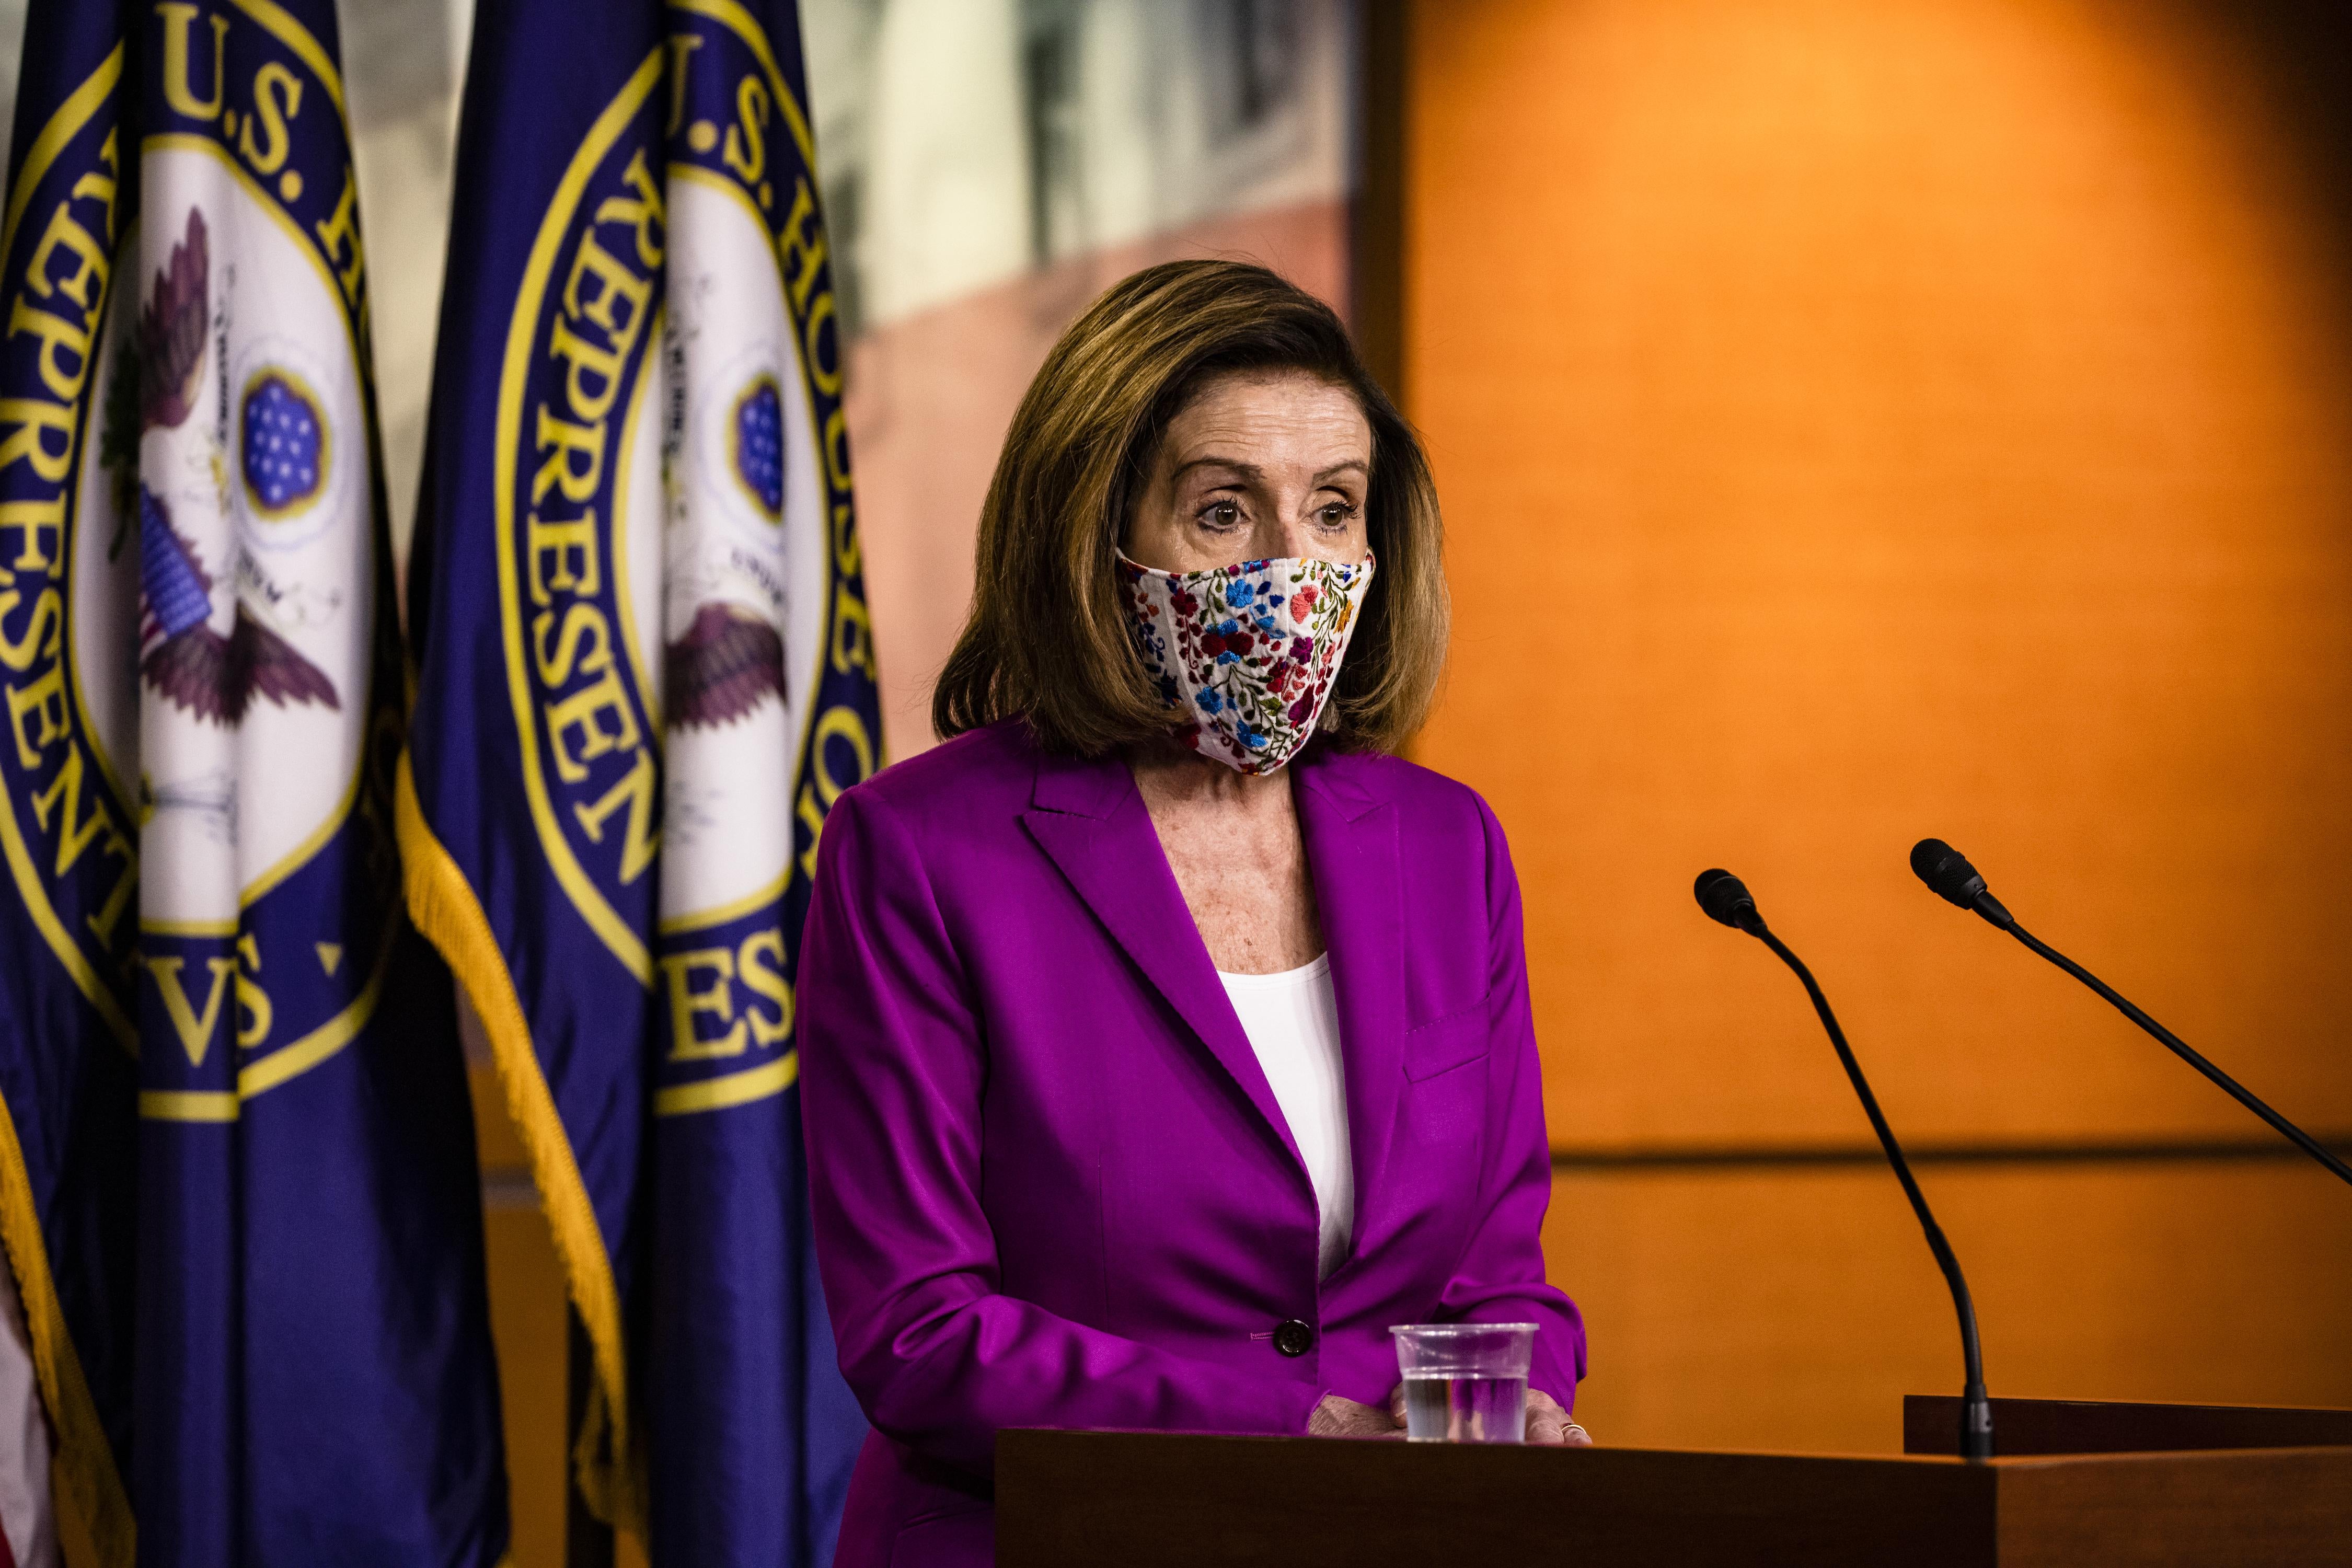 Pelosi speaks into two microphones while standing in front of two House of Representatives flags.